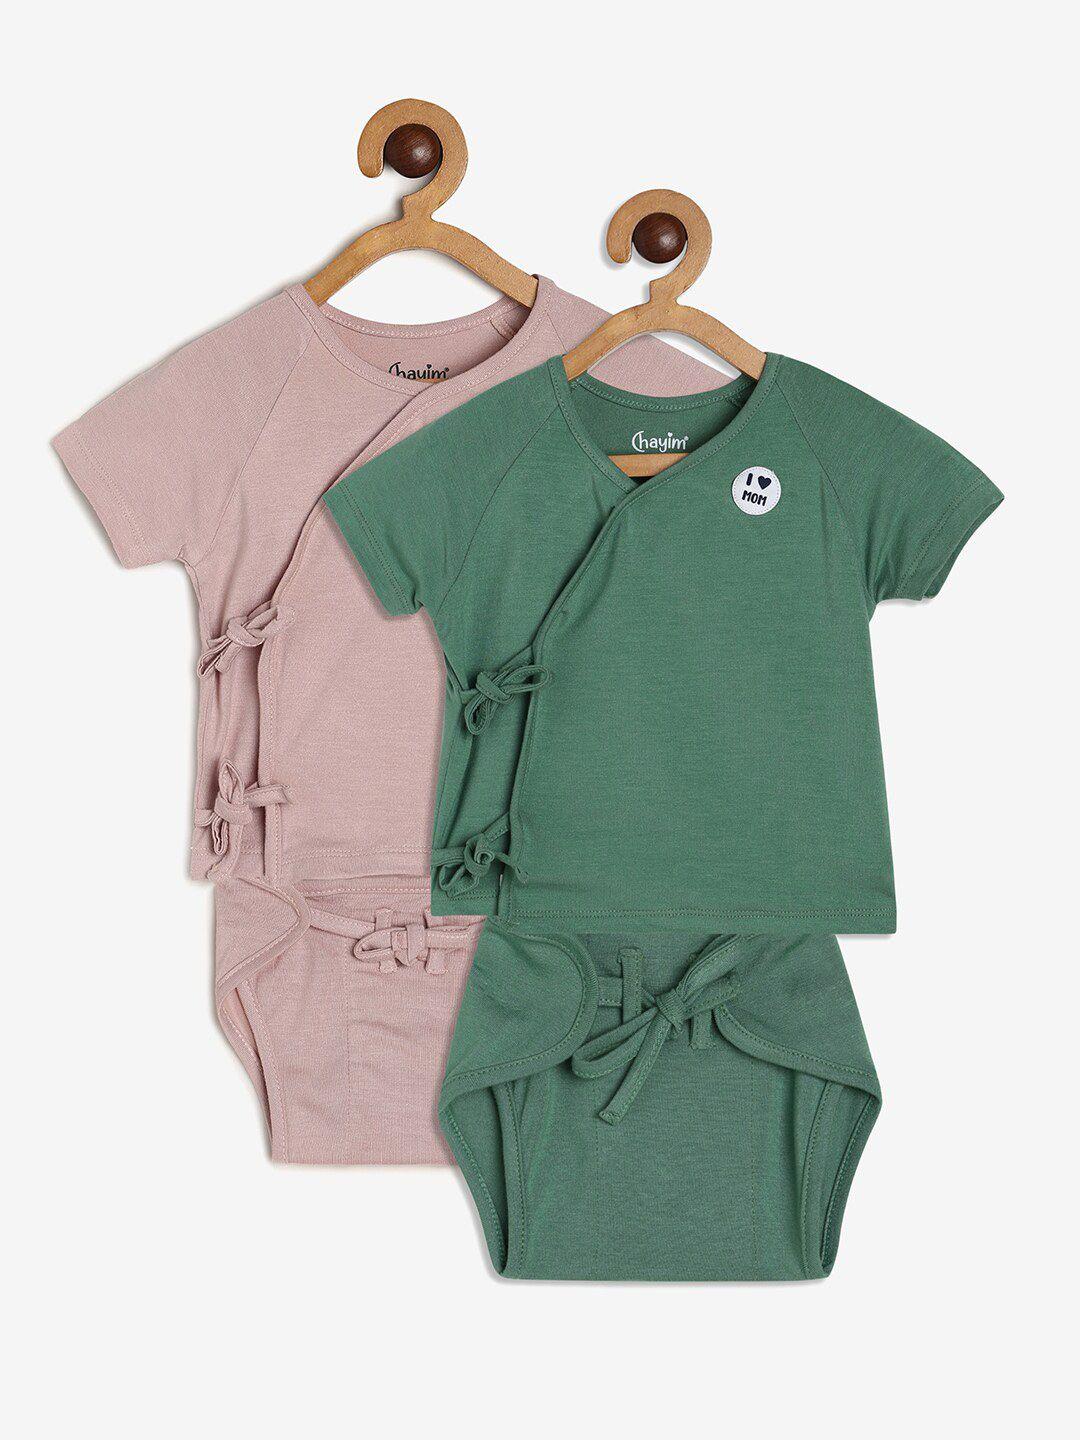 chayim unisex kids green & nude-coloured top